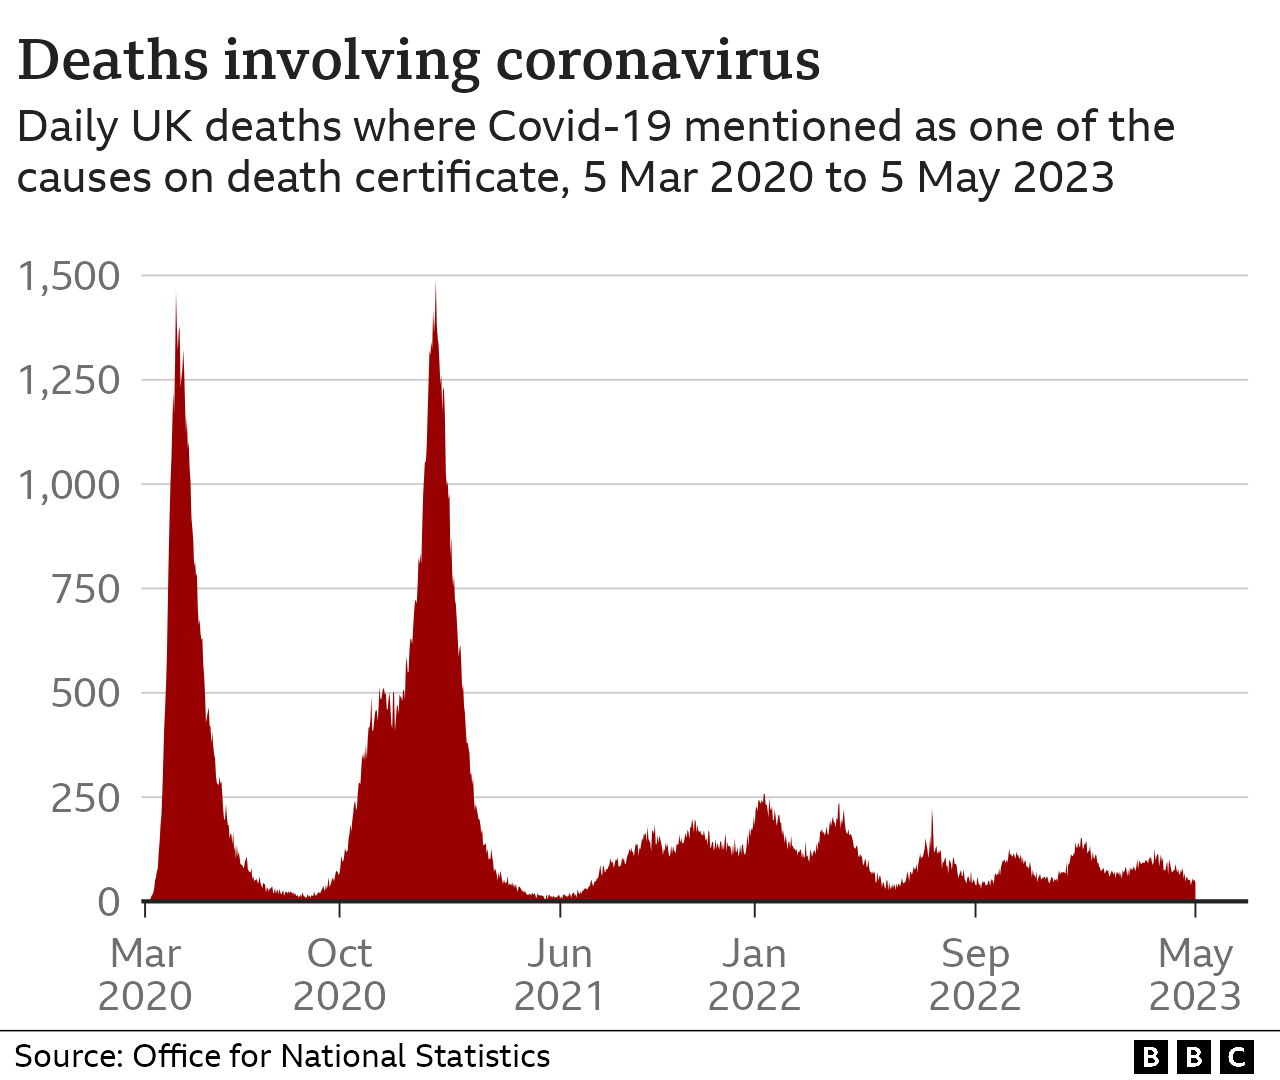 Chart showing daily deaths in the UK where covid-19 was mentioned as a cause on the death certificate. There are two sharp spikes in April 2020 and January 2021, with several days nearing 1,500 deaths reported, before it drops to far lower levels in mid 2021 until May 2023